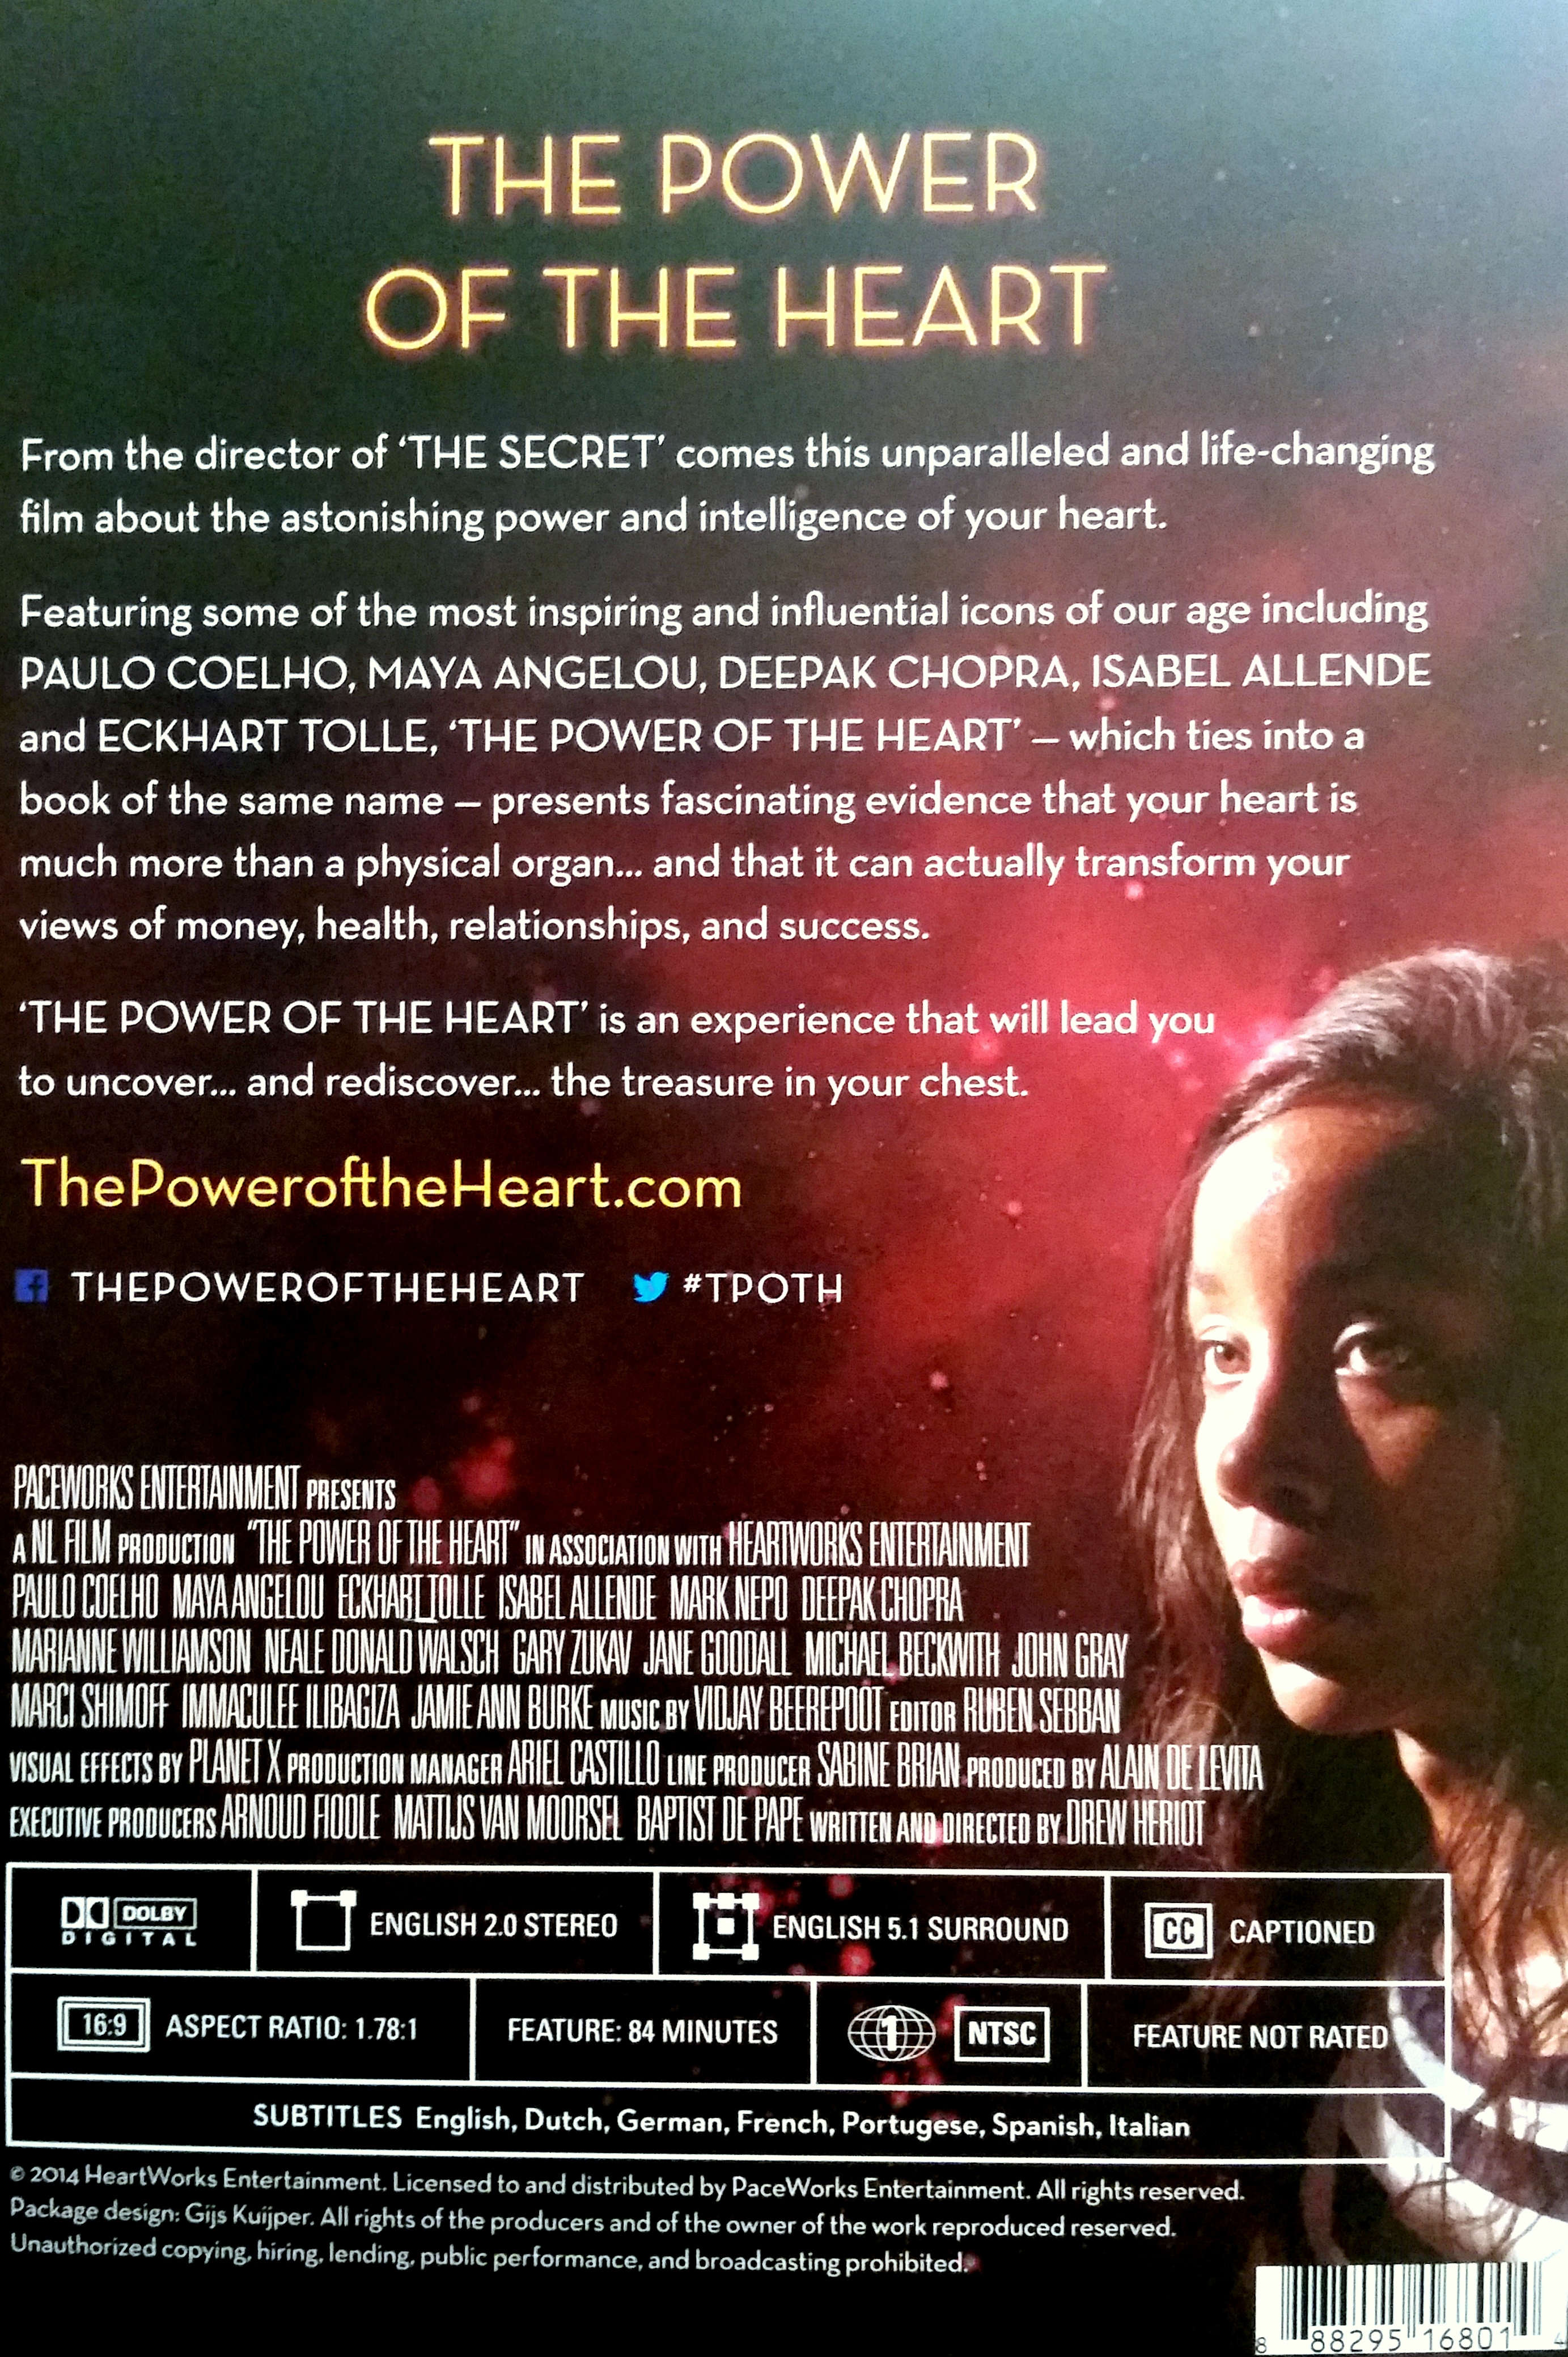 The Power of the Heart DVD Cover with Jamie Ann Burke as Immaculee Ilibagiza